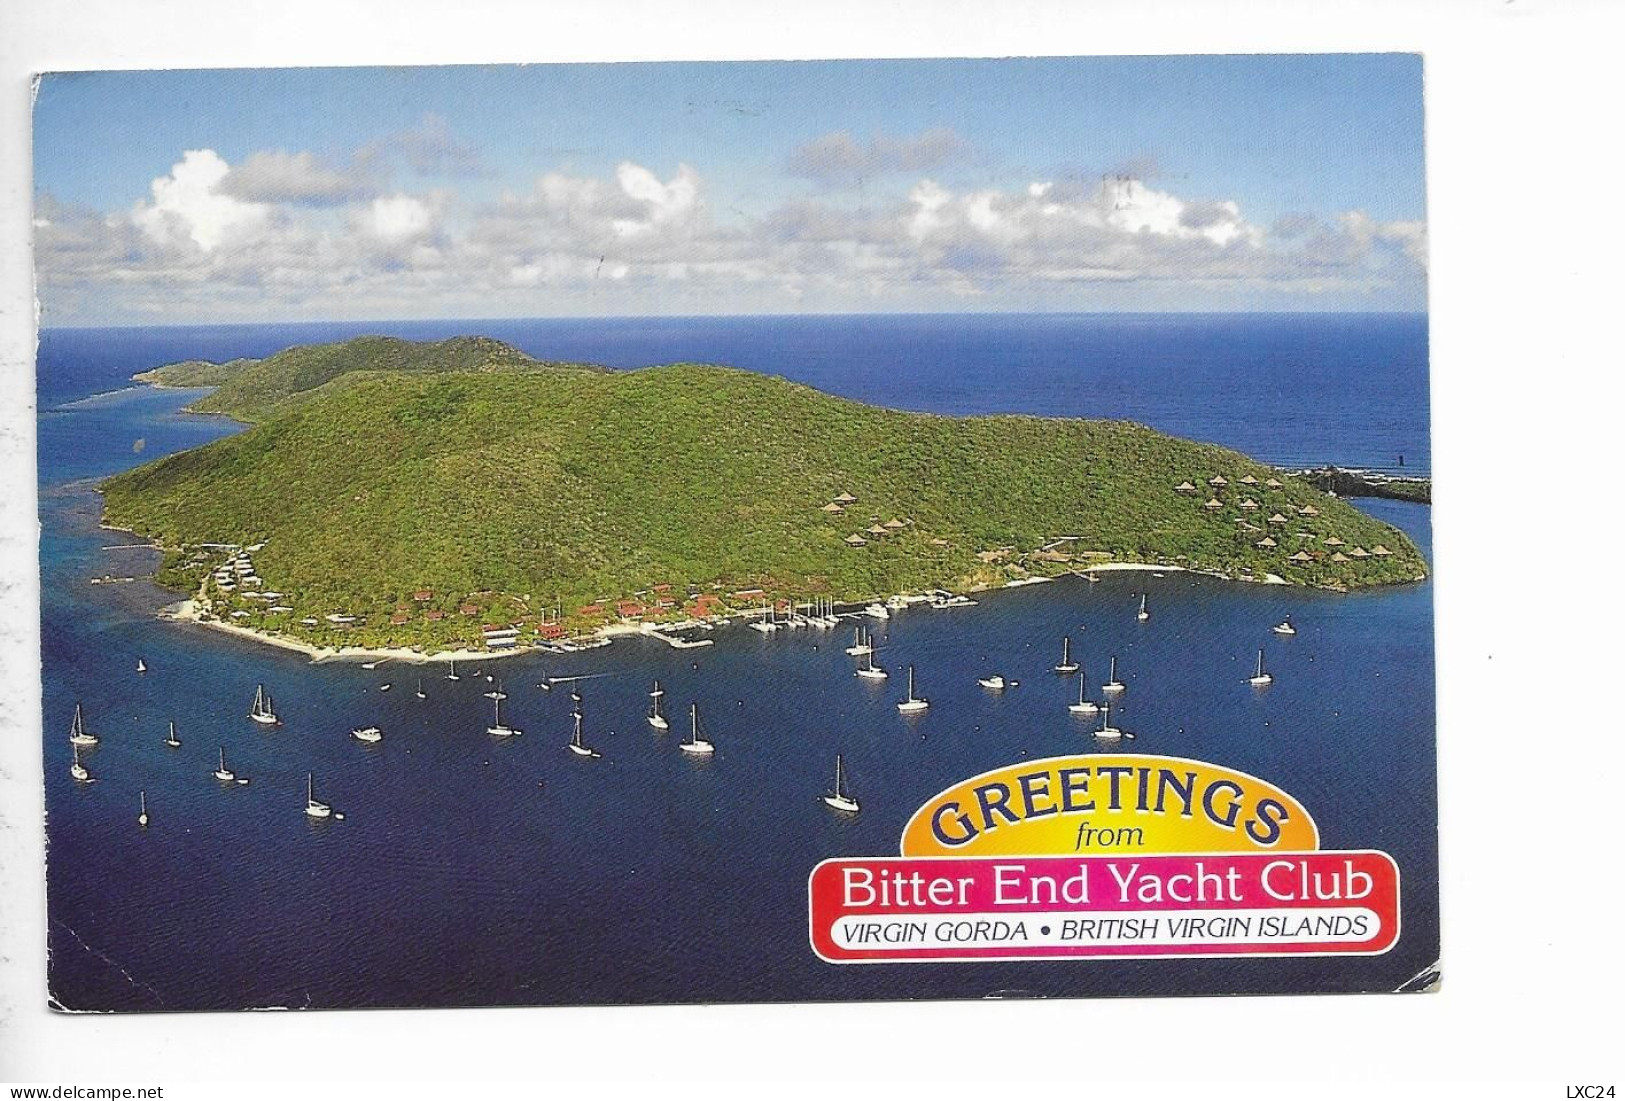 GREETINGS FROM BITTER END YACHT CLUB. VIRGIN GORDA. BRITISH VIRGIN ISLAND. - Virgin Islands, British